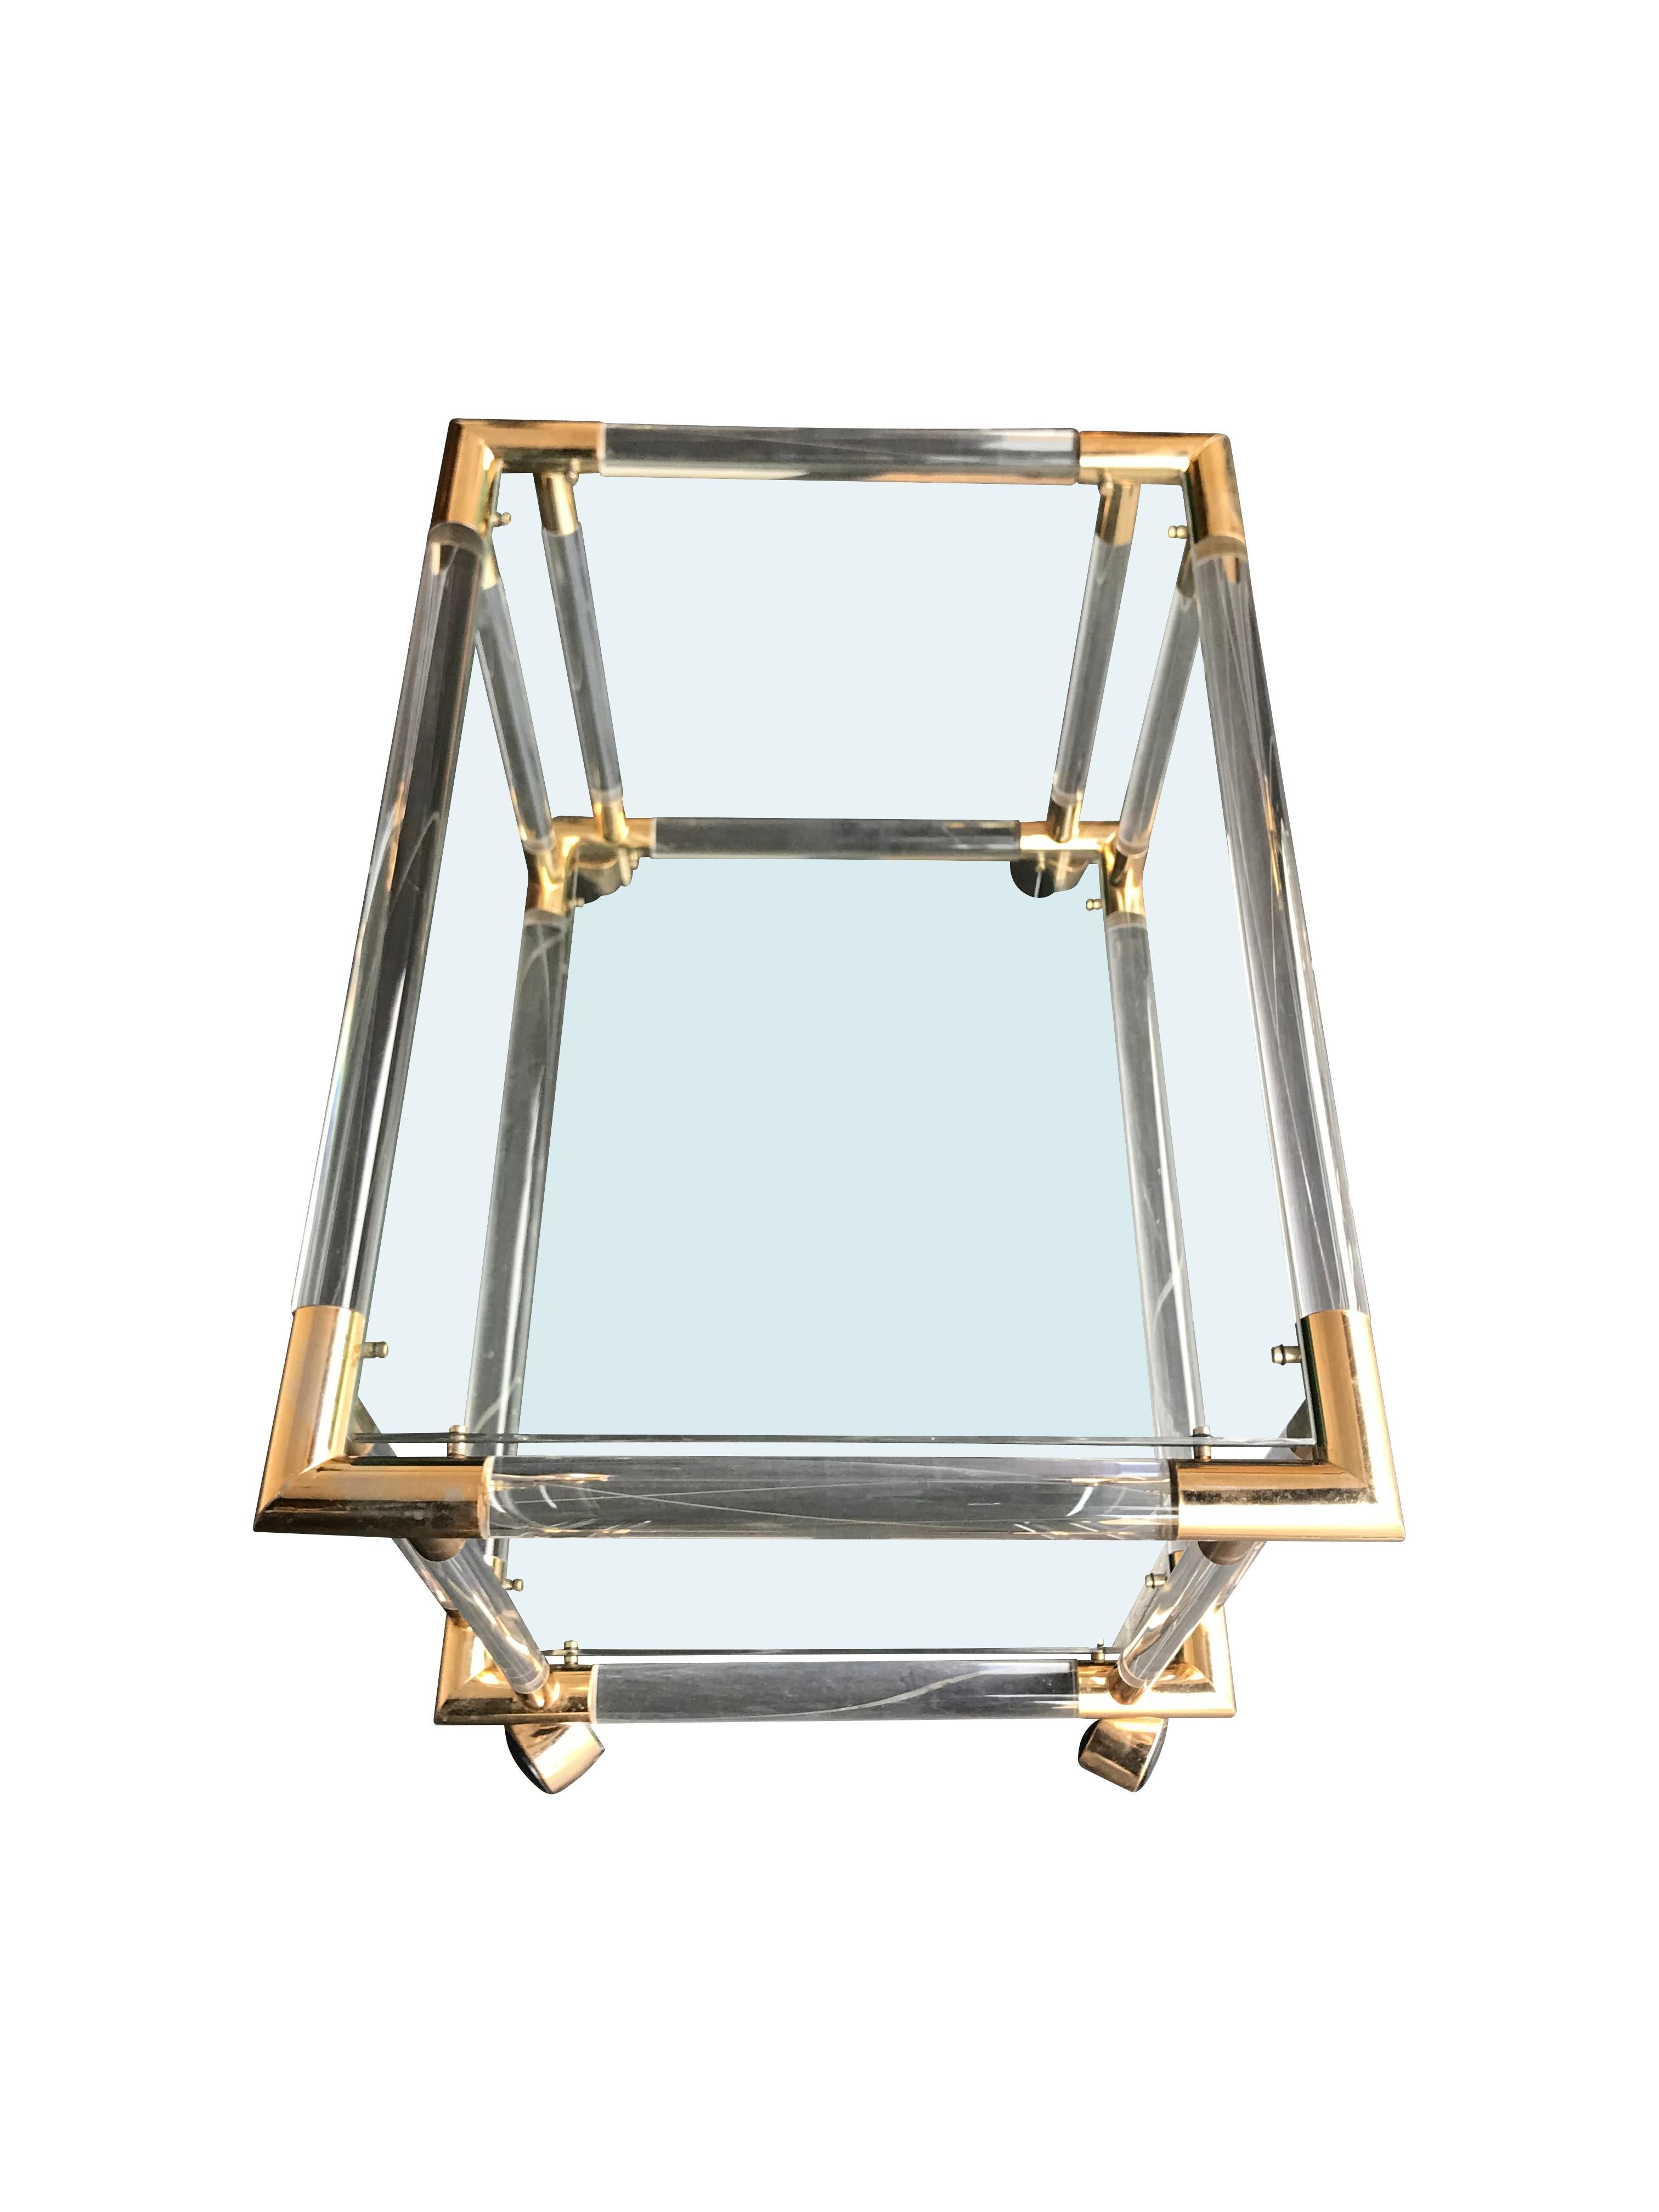 Late 20th Century Art Deco Style Lucite and Brass Bar Trolley / Side Table on Castors For Sale